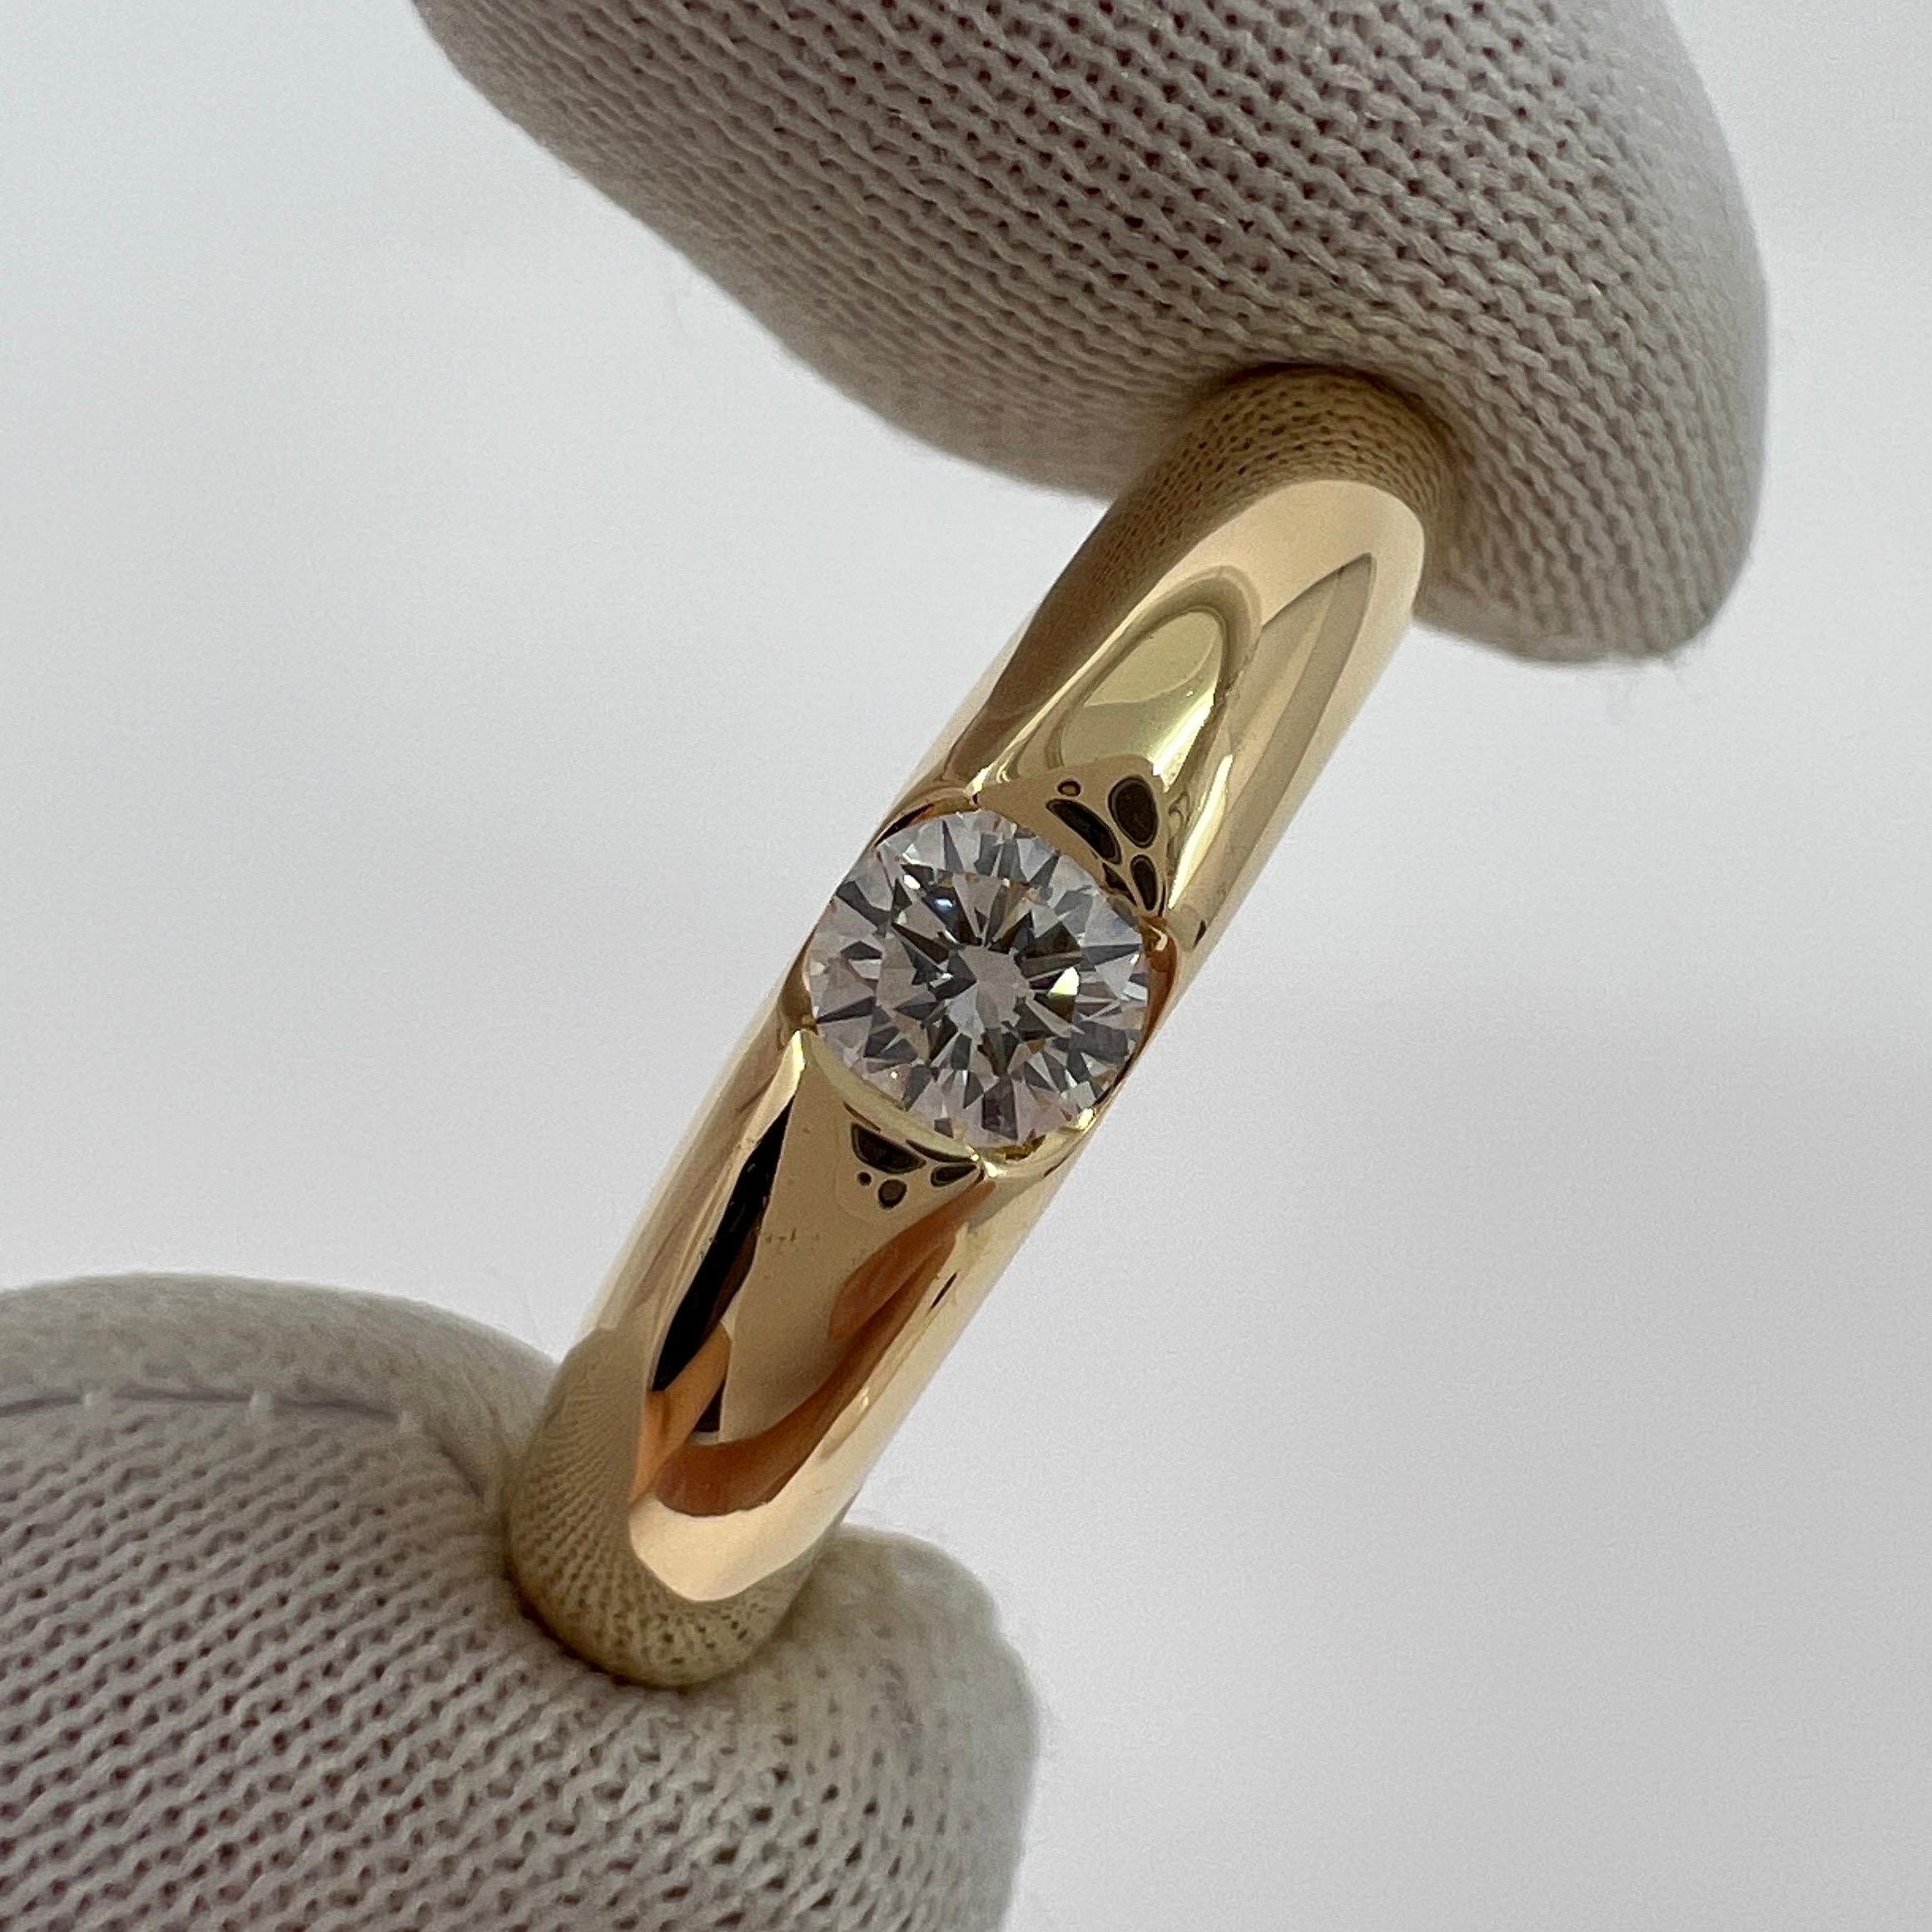 Vintage Cartier Round Brilliant Diamond 18k Yellow Gold Solitaire Ring.

Stunning yellow gold ring set with a fine 0.25ct round diamond. E colour VVS1 clarity with an excellent round brilliant cut.
Fine jewellery houses like Cartier only use the